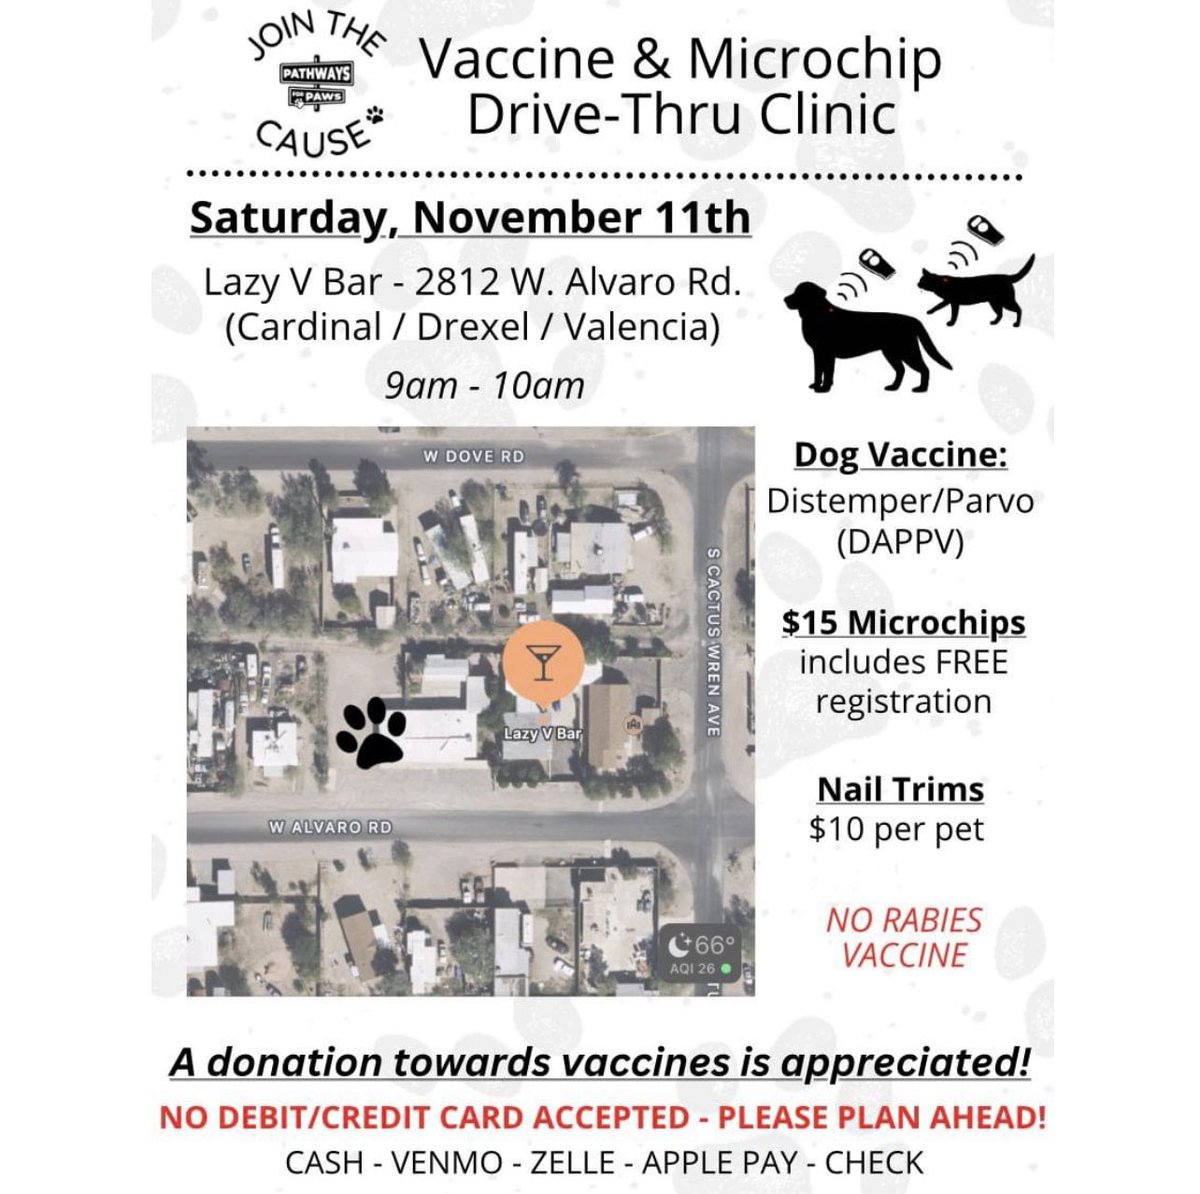 Please 'Join the Cause' this Saturday, November 11th, at our new Drive-Thru Vaccine & Microchip Clinic location from 9am-10am! We will be on the West Side of town (Cardinal / Drexel / Valencia)! All services done from the convenience of your vehicle 🐾 @whatsuptucson